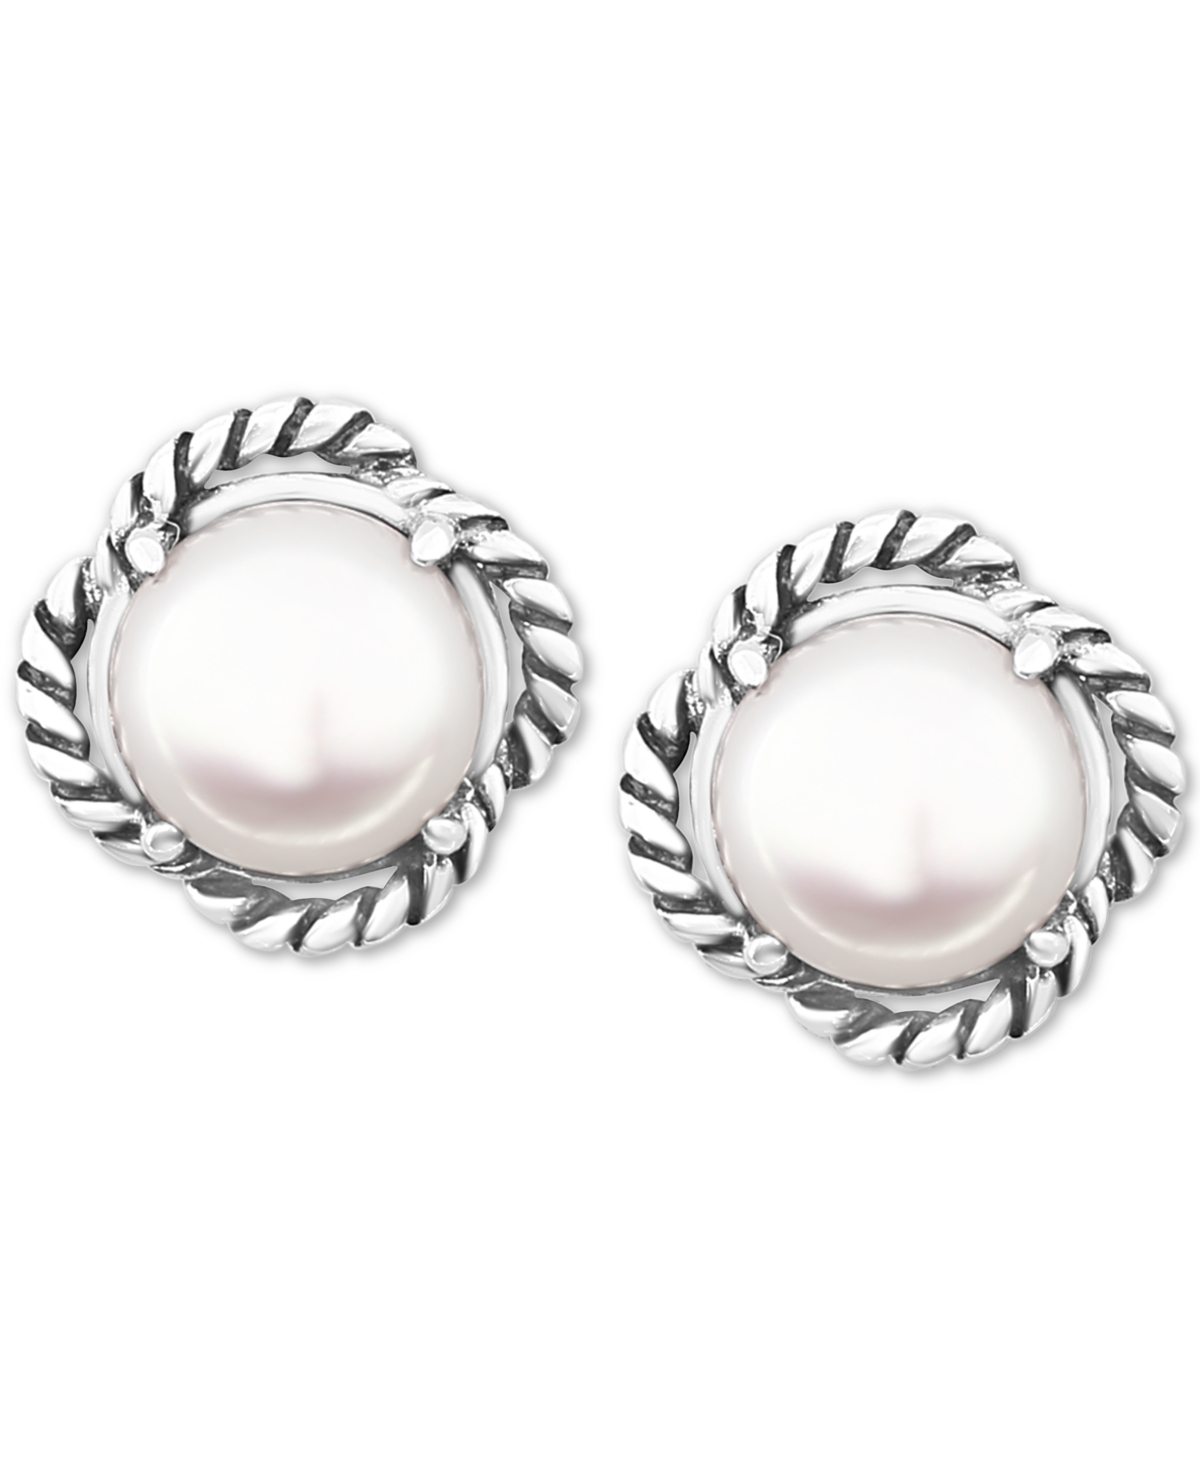 Effy Collection Effy Cultured Freshwater Pearl (8mm) Stud Earrings in Sterling Silver